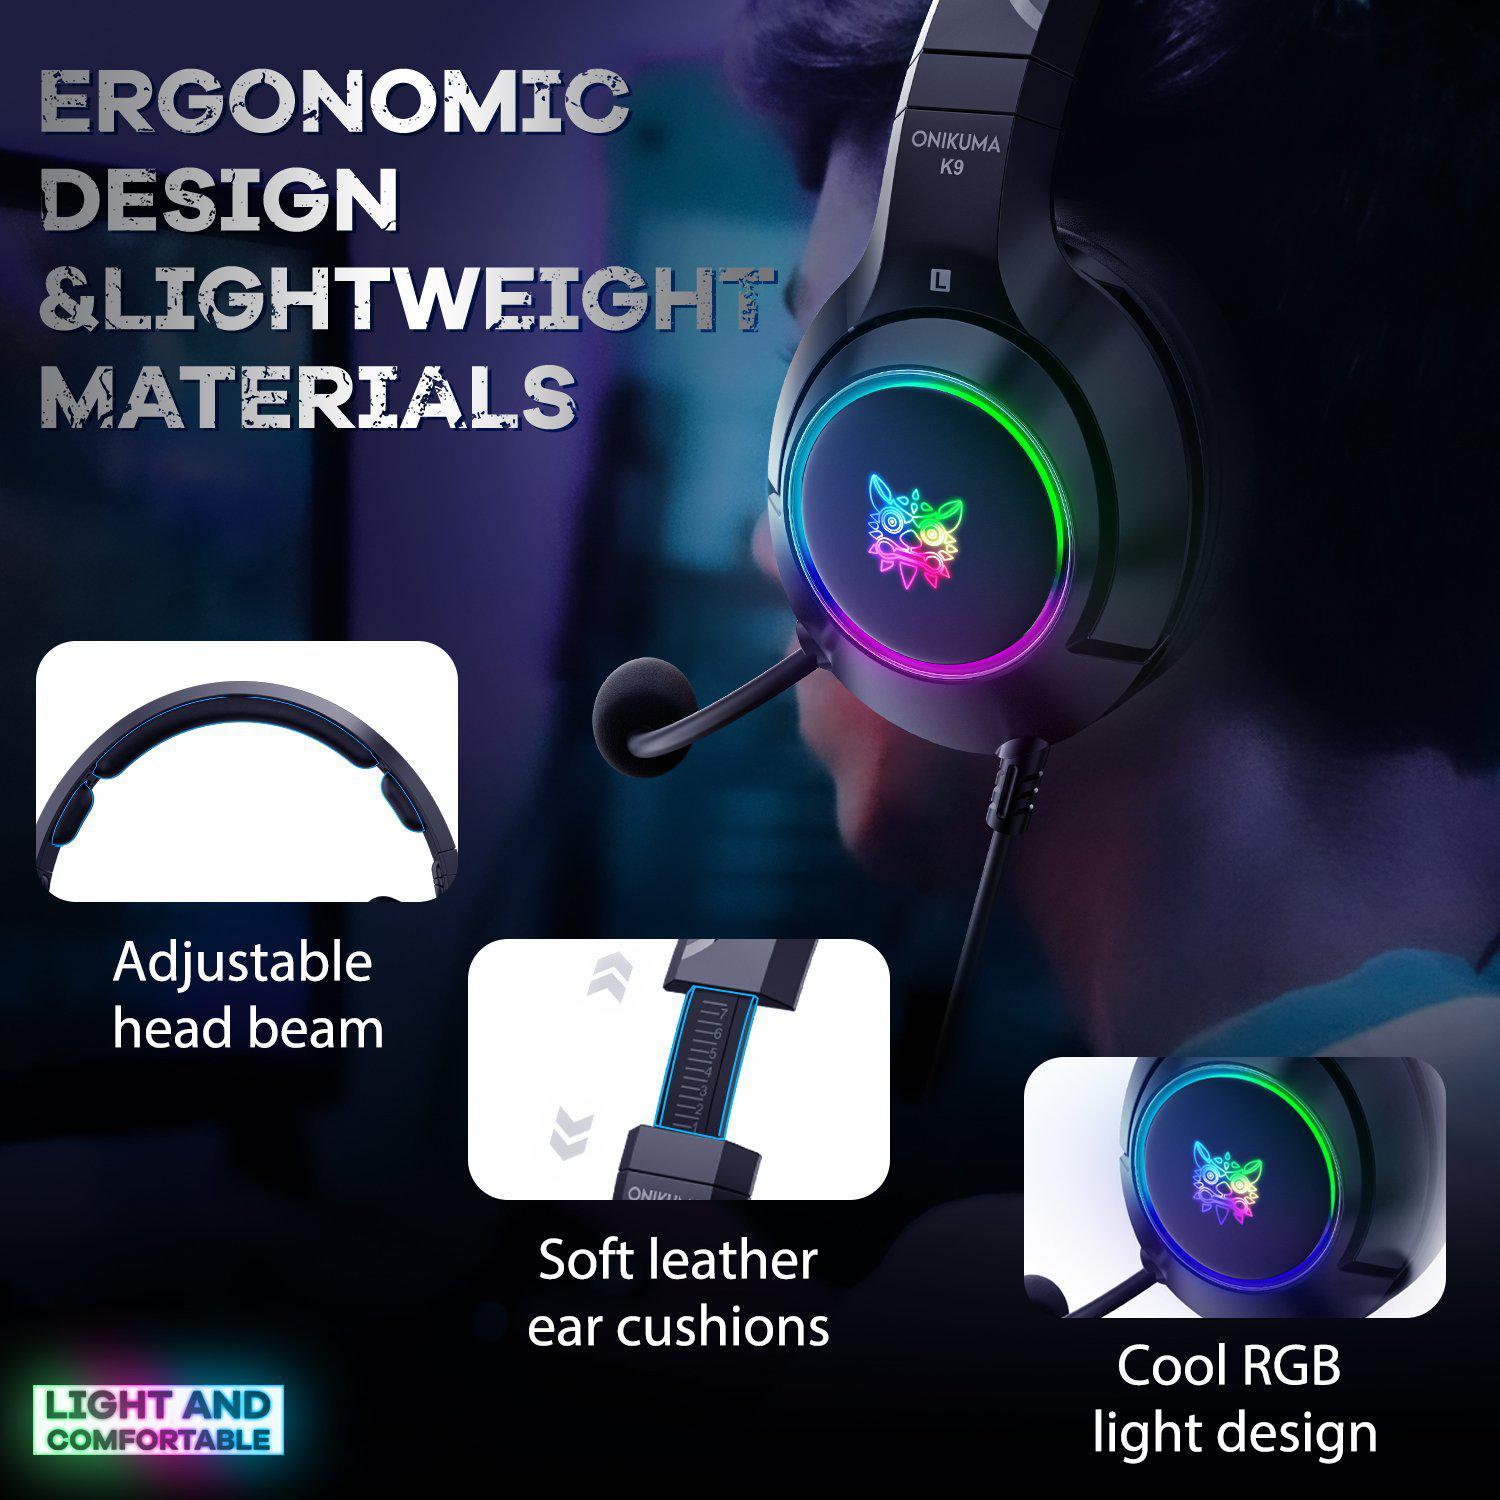 Onikuma K9 RGB Noise Canceling Gaming Headset With Microphone